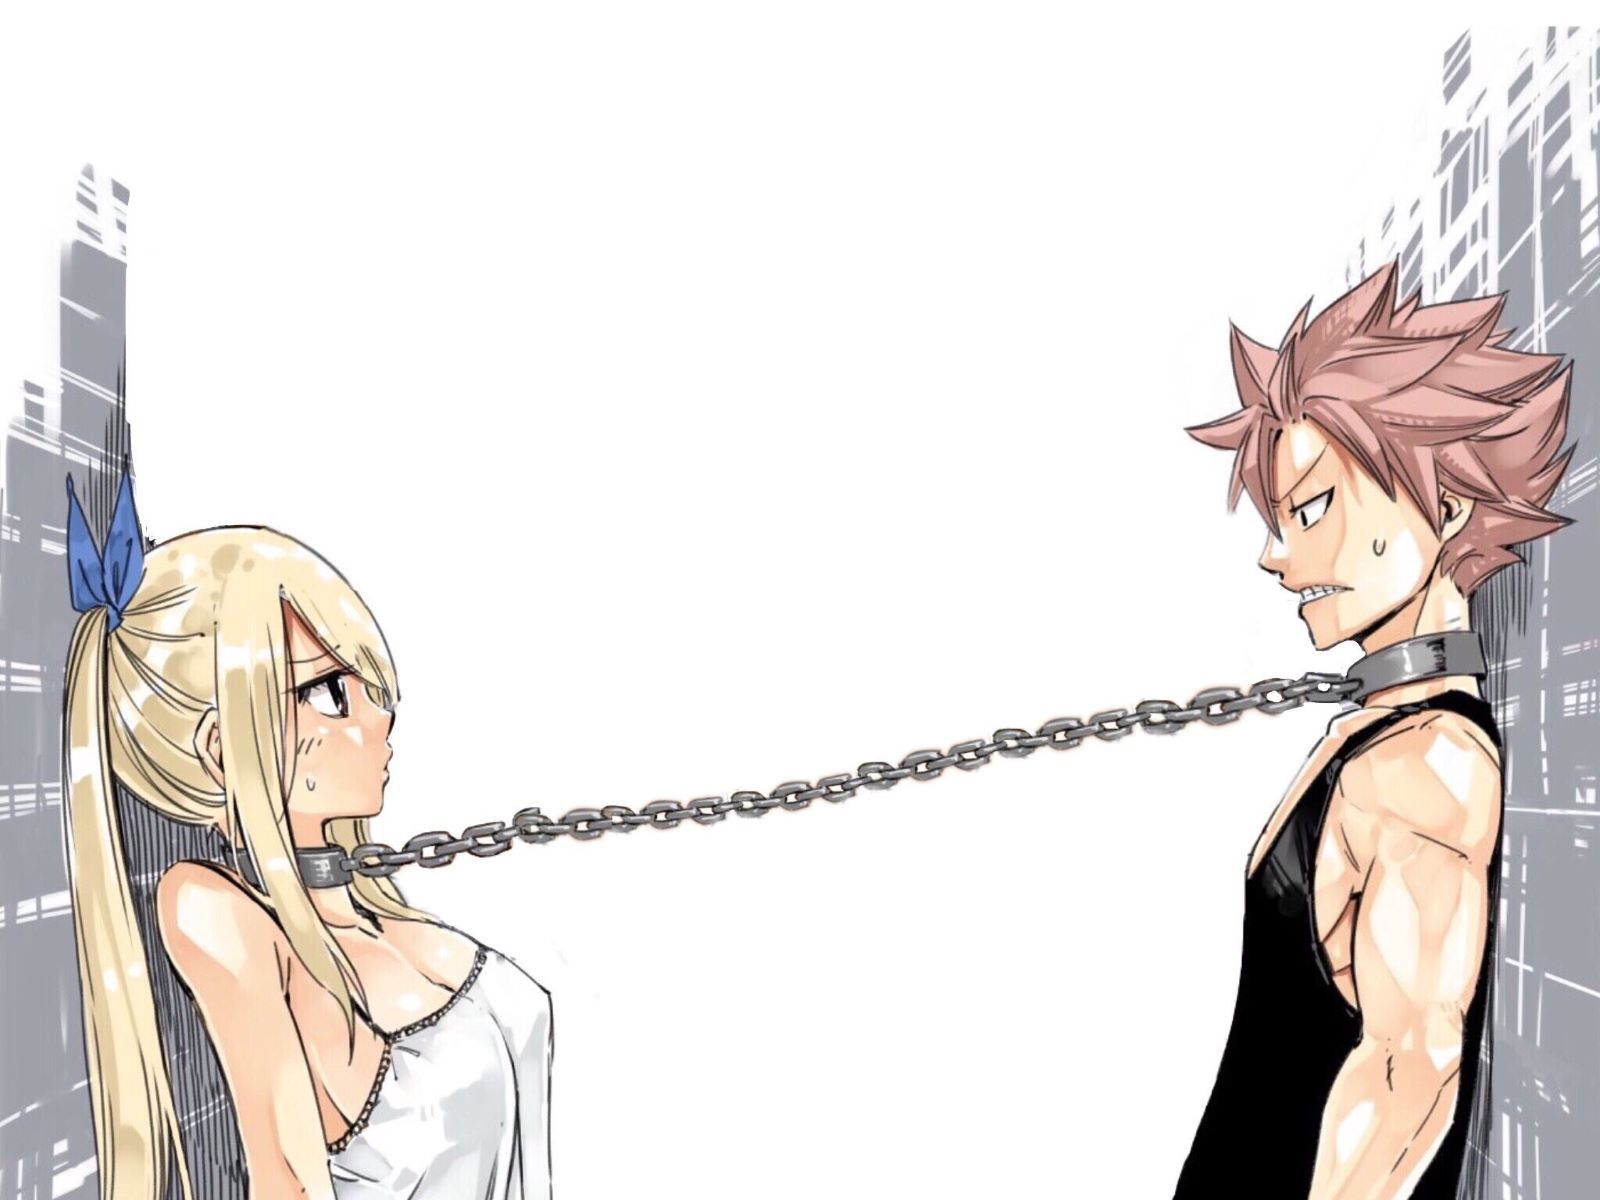 The Surprising Truth About Natsu And Lucy's Relationship! Find Out What Really Happened!